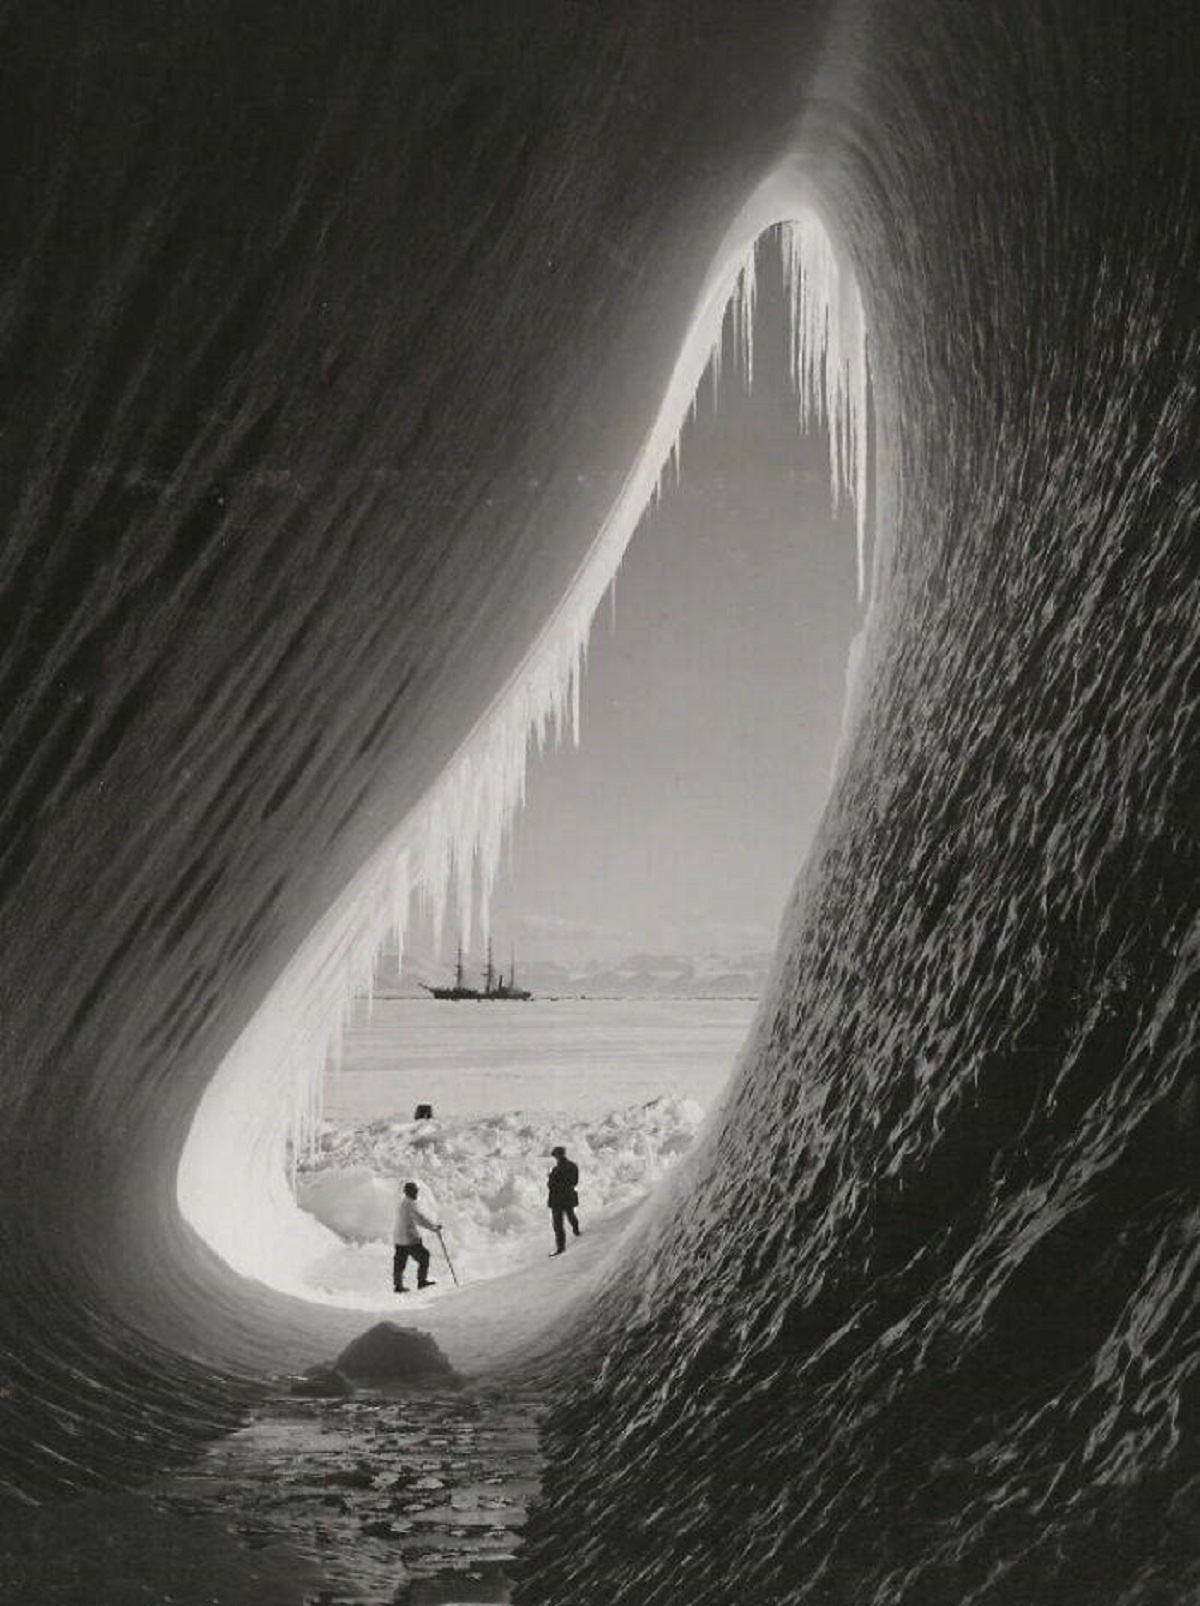 "Grotto In An Iceberg, 1911"

"Geologist Thomas Griffith Taylor and Meteorologist Charles Wright photographed on the 5 January 1911 at the entrance of a grotto in the side of an iceberg with the Terra Nova ship in the background. This was a part of the British Antarctic Expedition led by Captain Robert Falcon Scott which lasted from 1910-1913."